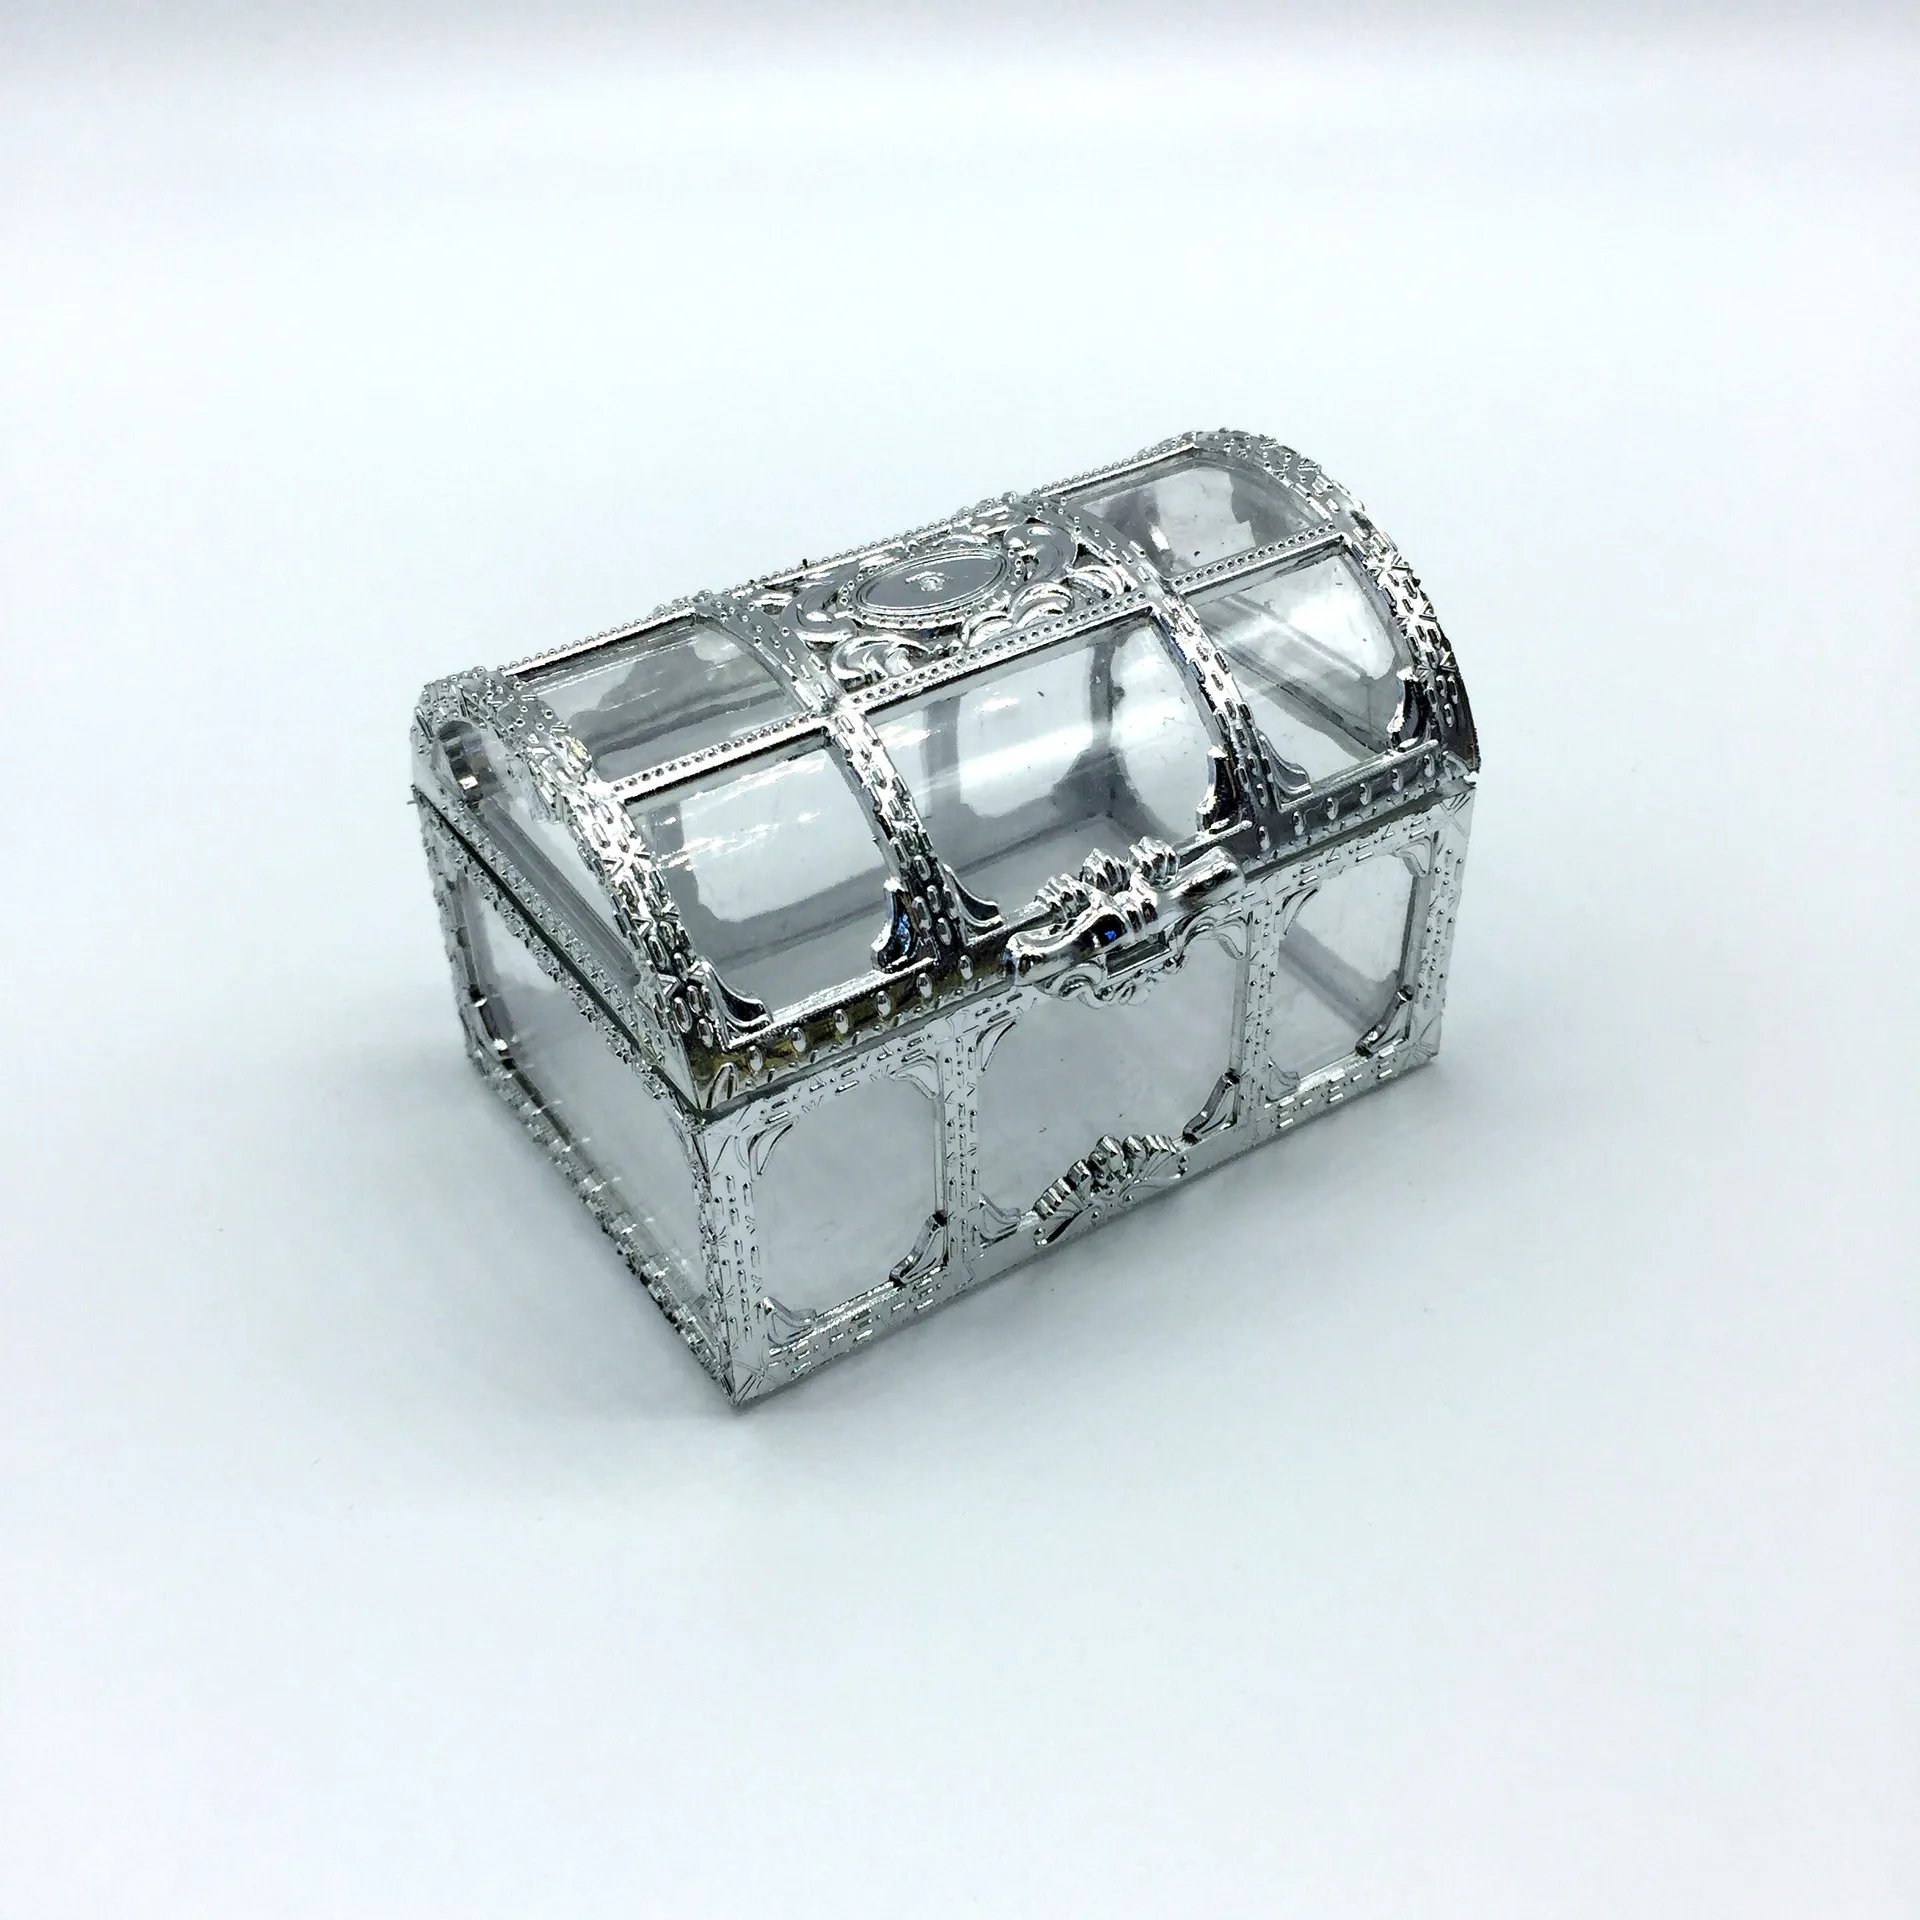 100pcs Free shipping top grade golden silvery transparent plastic treasure chest wedding candy box gift boxes lin3736